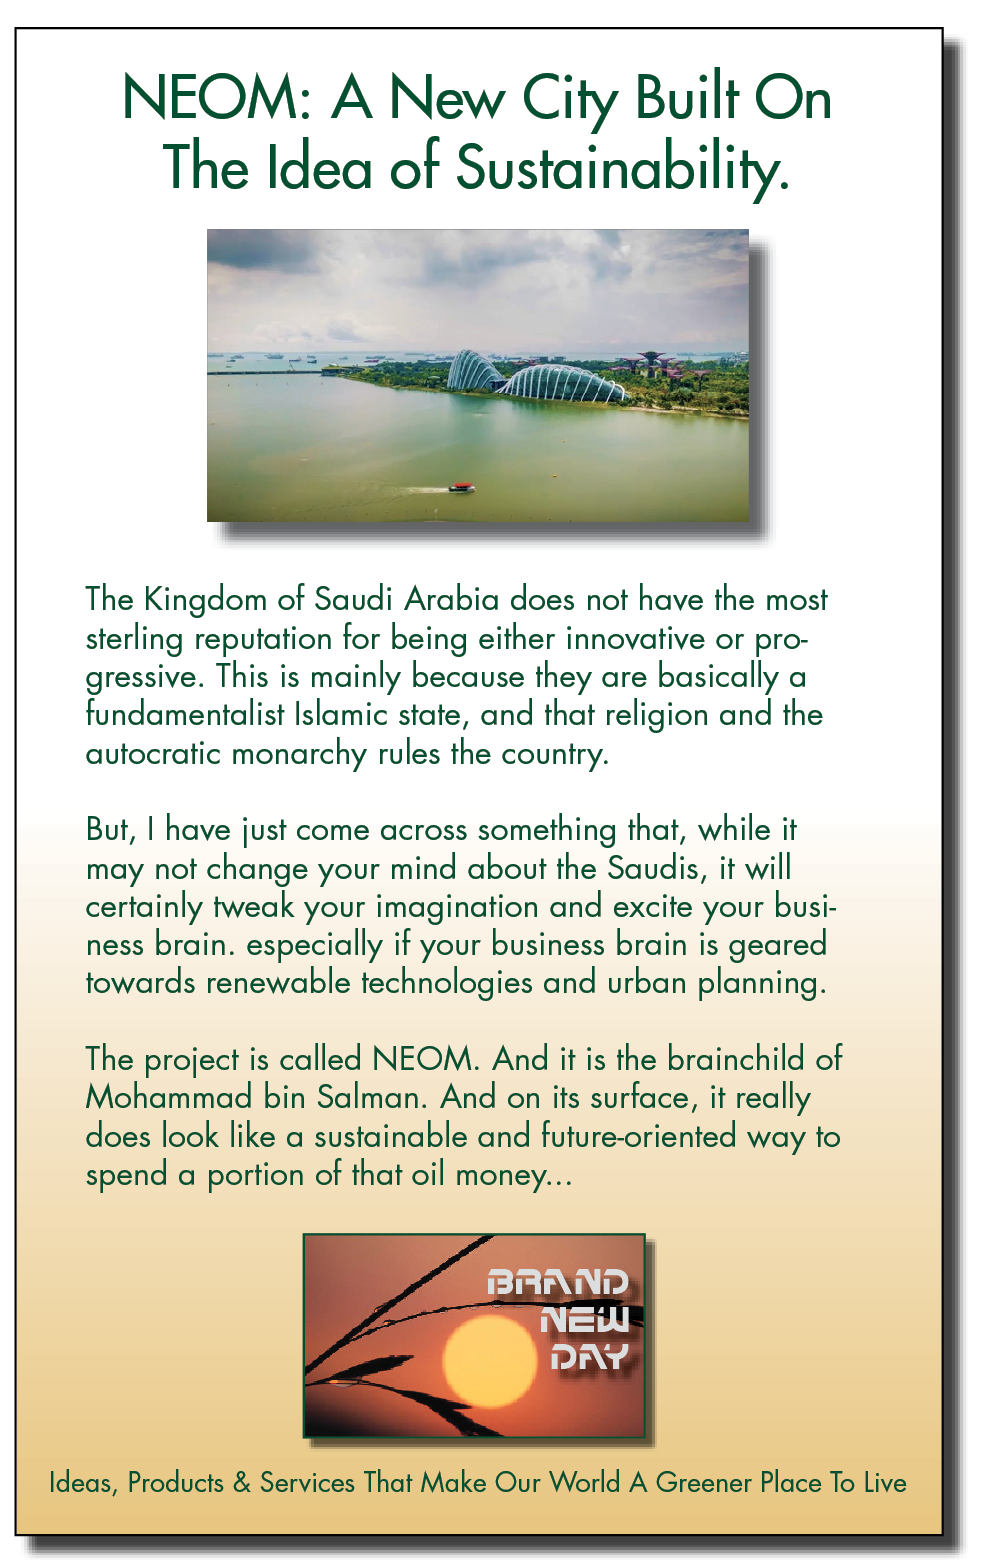 NEOM: A New City Built On
The Idea of Sustainability.

-

The Kingdom of Saudi Arabia does not have the most
sterling reputation for being either innovative or pro-
gressive. This is mainly because they are basically a
fundamentalist Islamic state, and that religion and the
autocratic monarchy rules the country.

But, | have just come across something that, while it
may not change your mind about the Saudis, it will
certainly tweak your imagination and excite your busi-
ness brain. especially if your business brain is geared
towards renewable technologies and urban planning.

The project is called NEOM. And it is the brainchild of
Mohammad bin Salman. And on its surface, it really
does look like a sustainable and future-oriented way to
spend a portion of that oil money...

ERY) [P)
0 [=Y
¢o

Ideas, Products & Services That Make Our World A Greener Place To Live